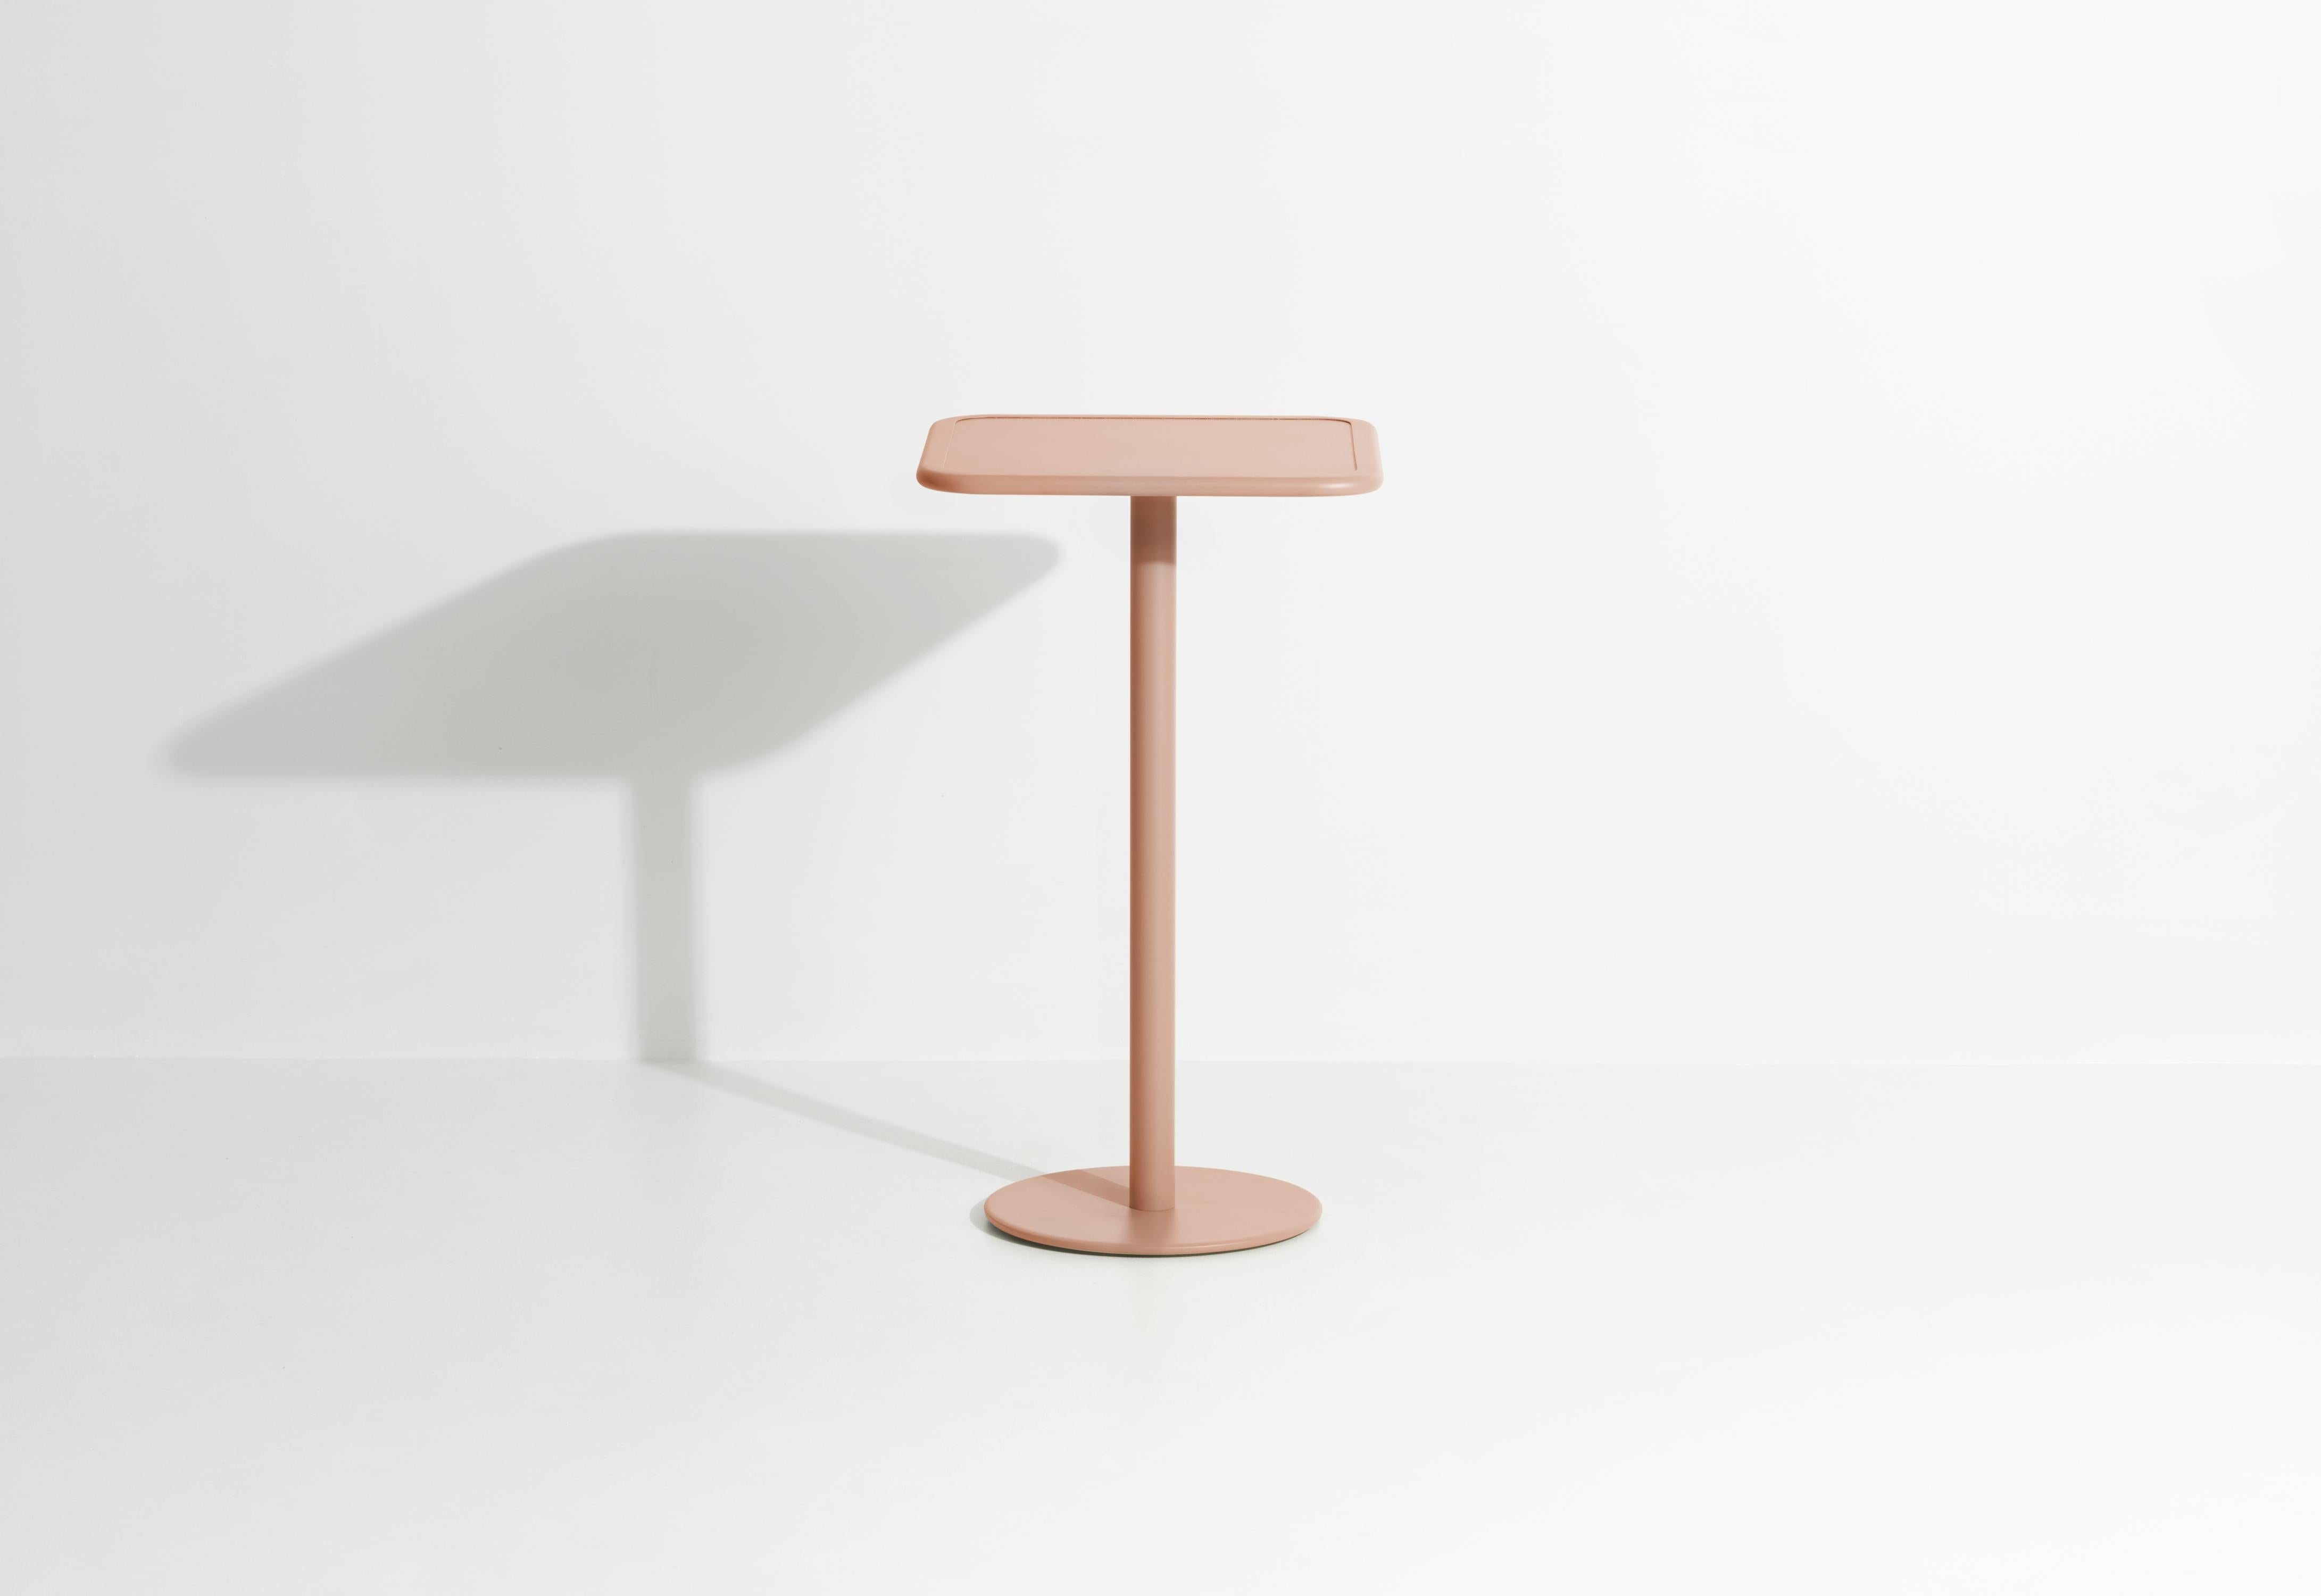 Petite Friture Week-End Square High Table in Blush Aluminium, 2017 In New Condition For Sale In Brooklyn, NY